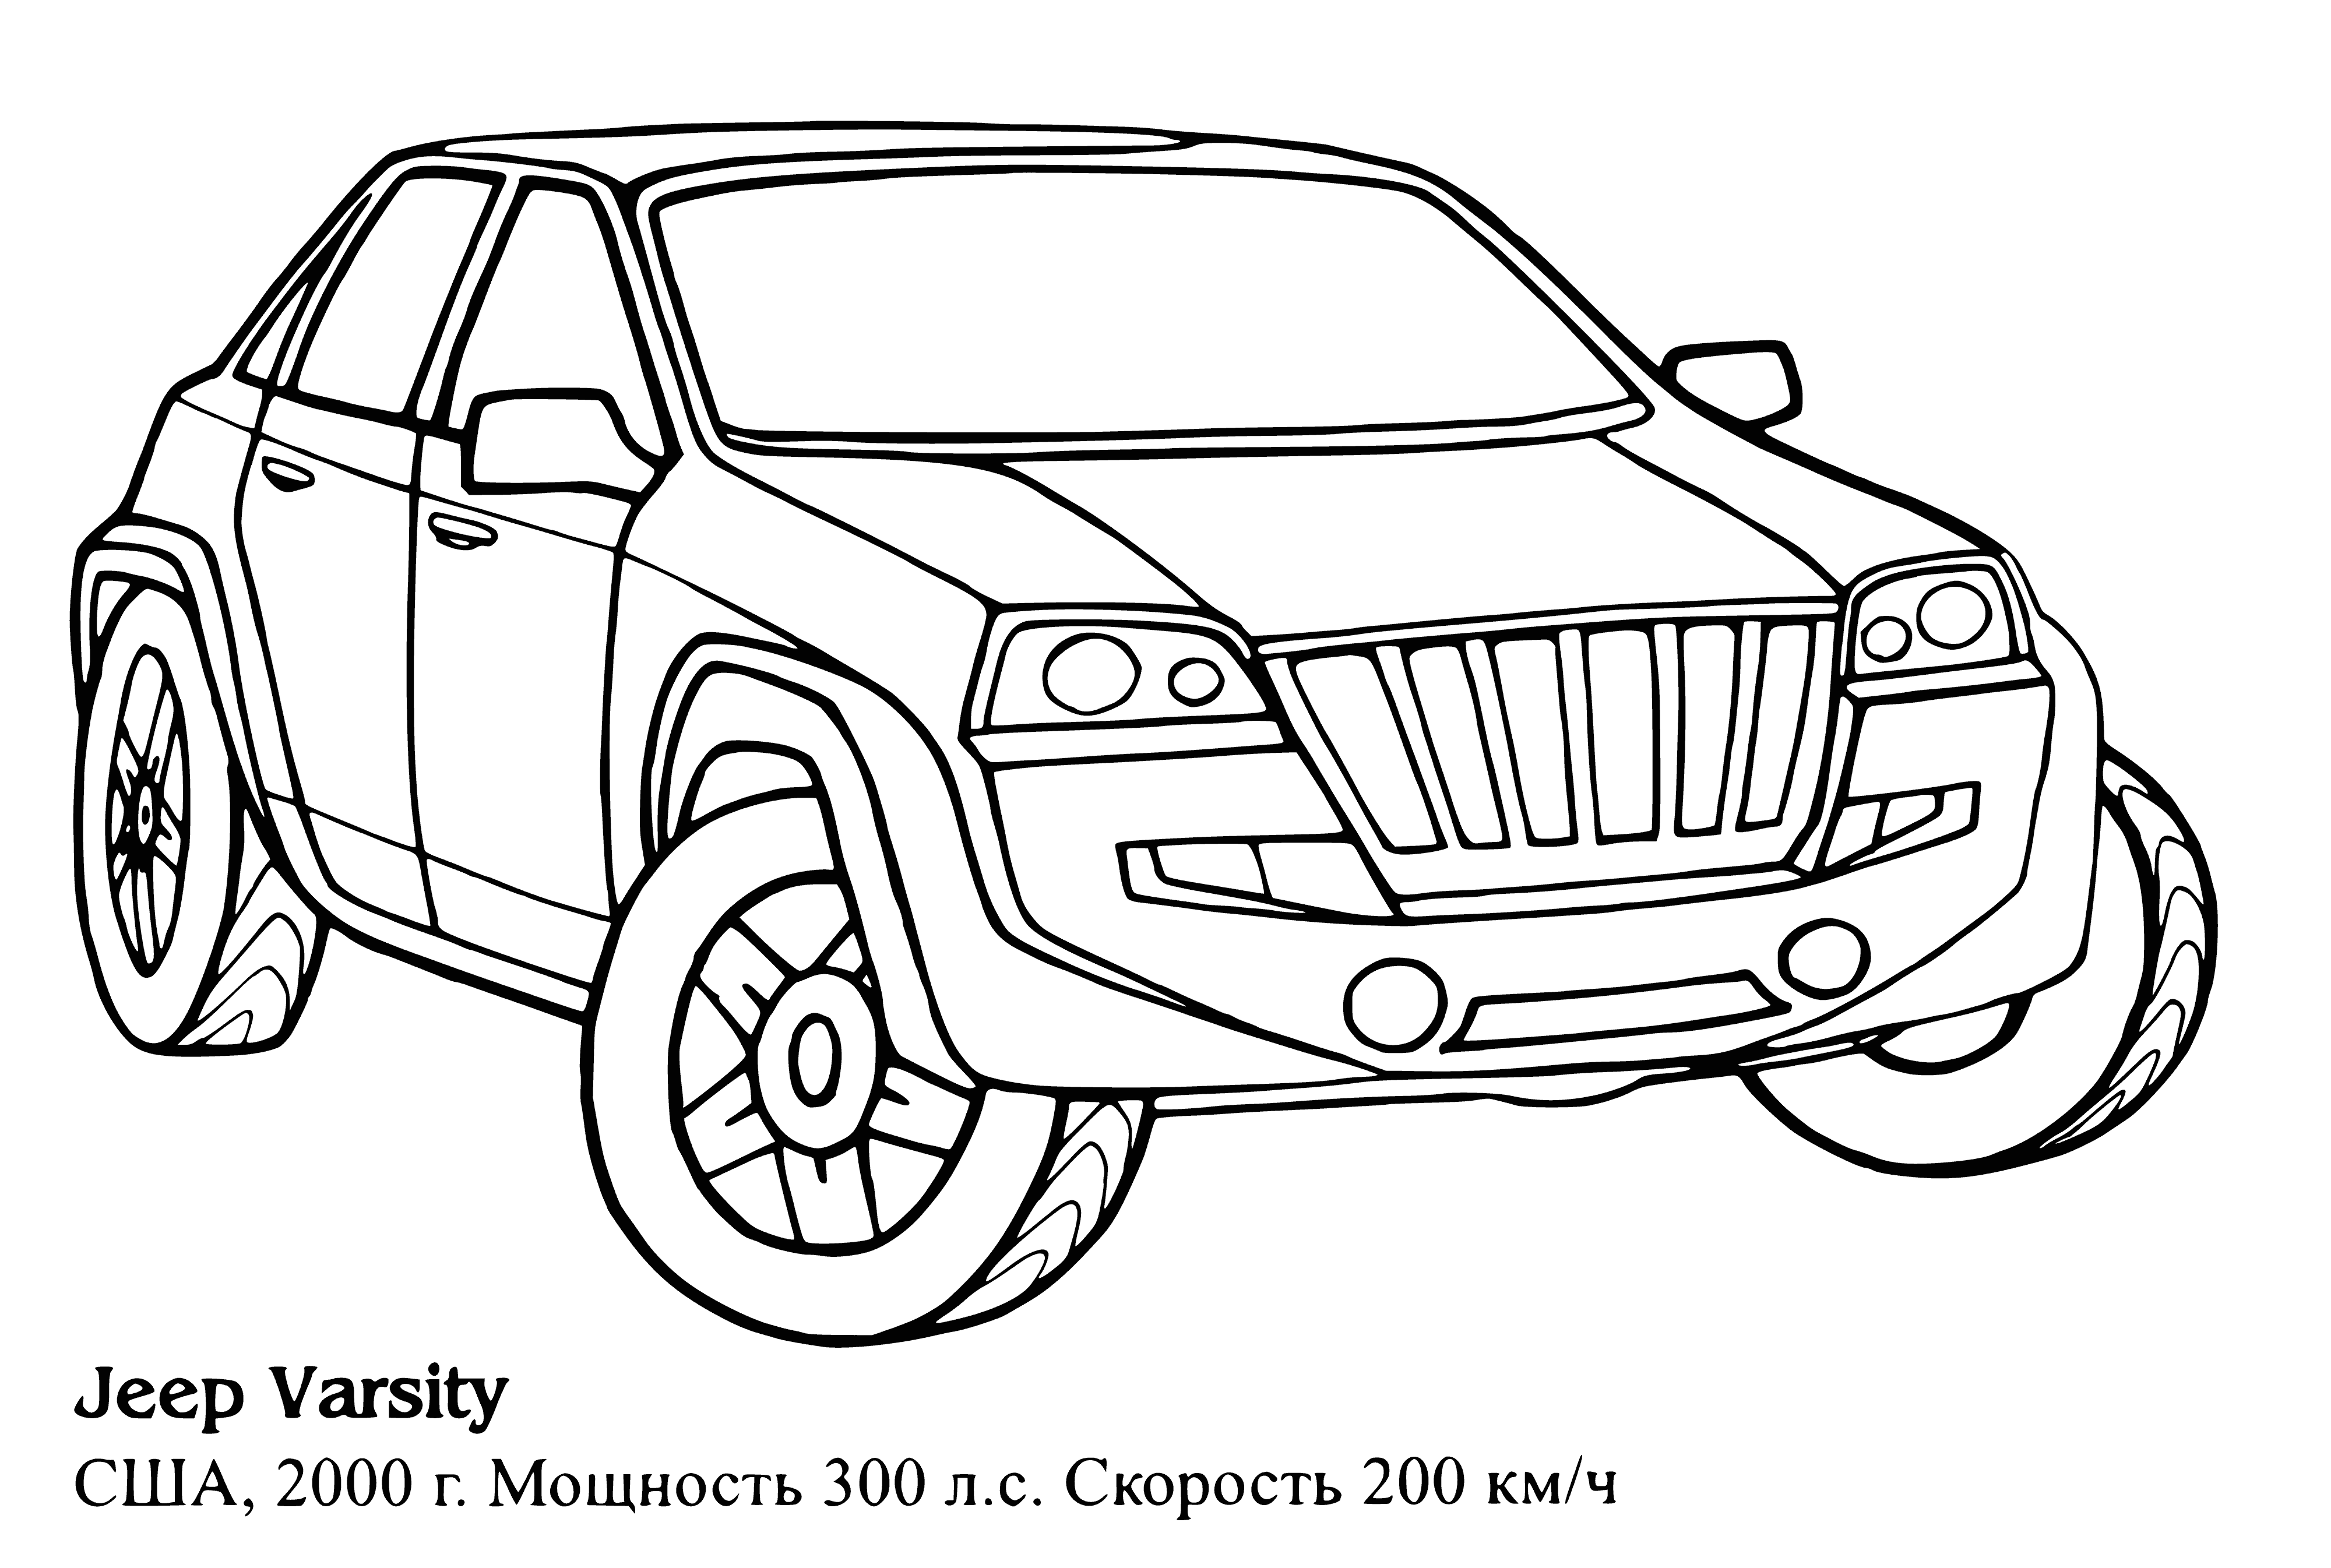 coloring page: Jeep drives down a road with mountains in background, "Varsity" written on side in red lettering.